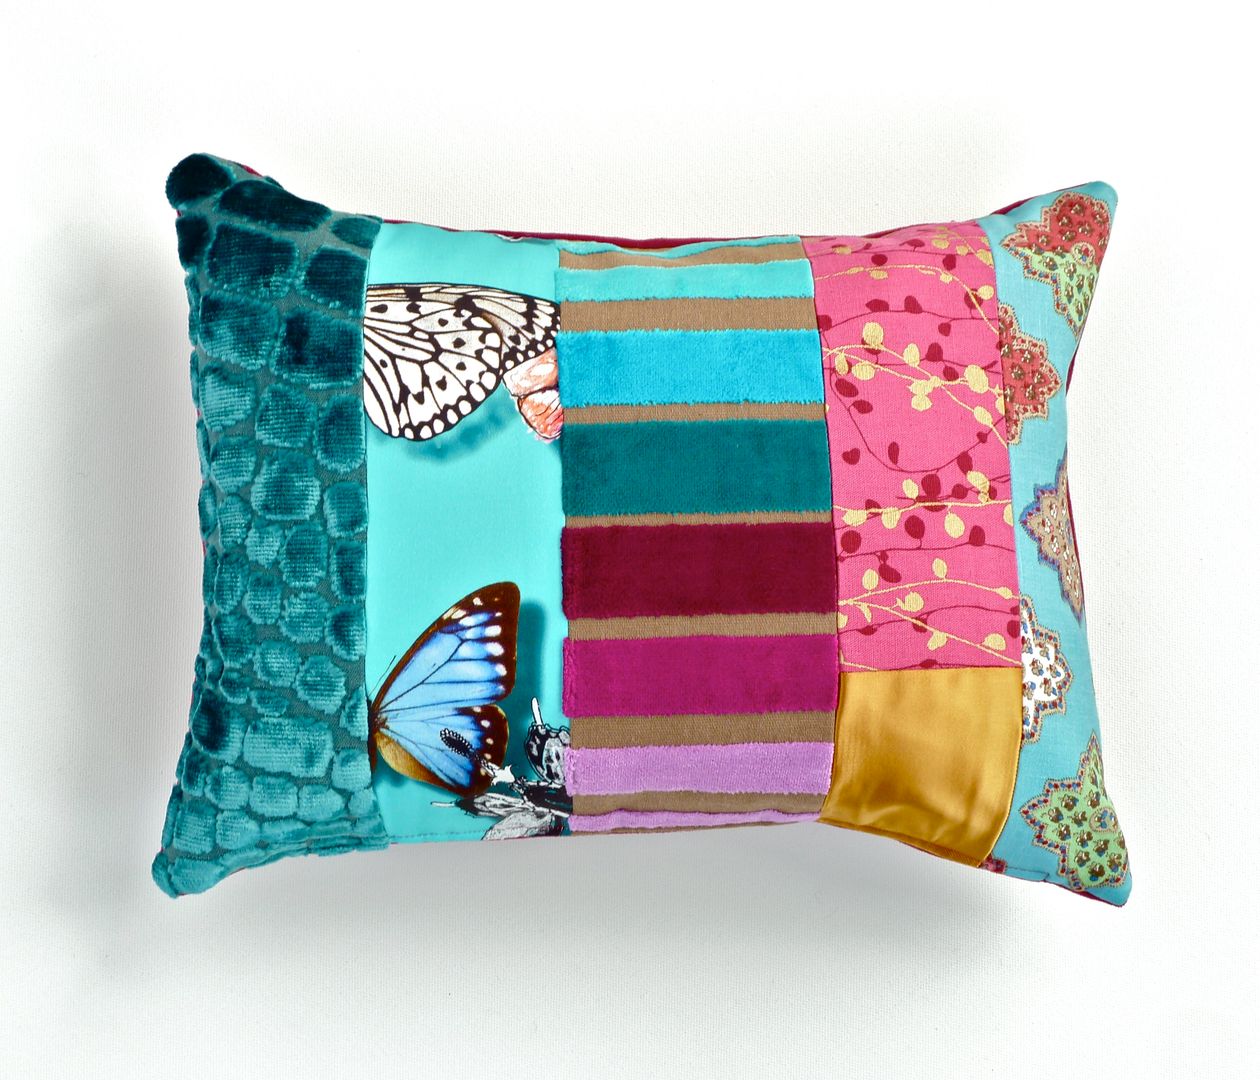 Rocco luxury patchwork cushion Suzy Newton Ltd. Eclectic style living room Accessories & decoration